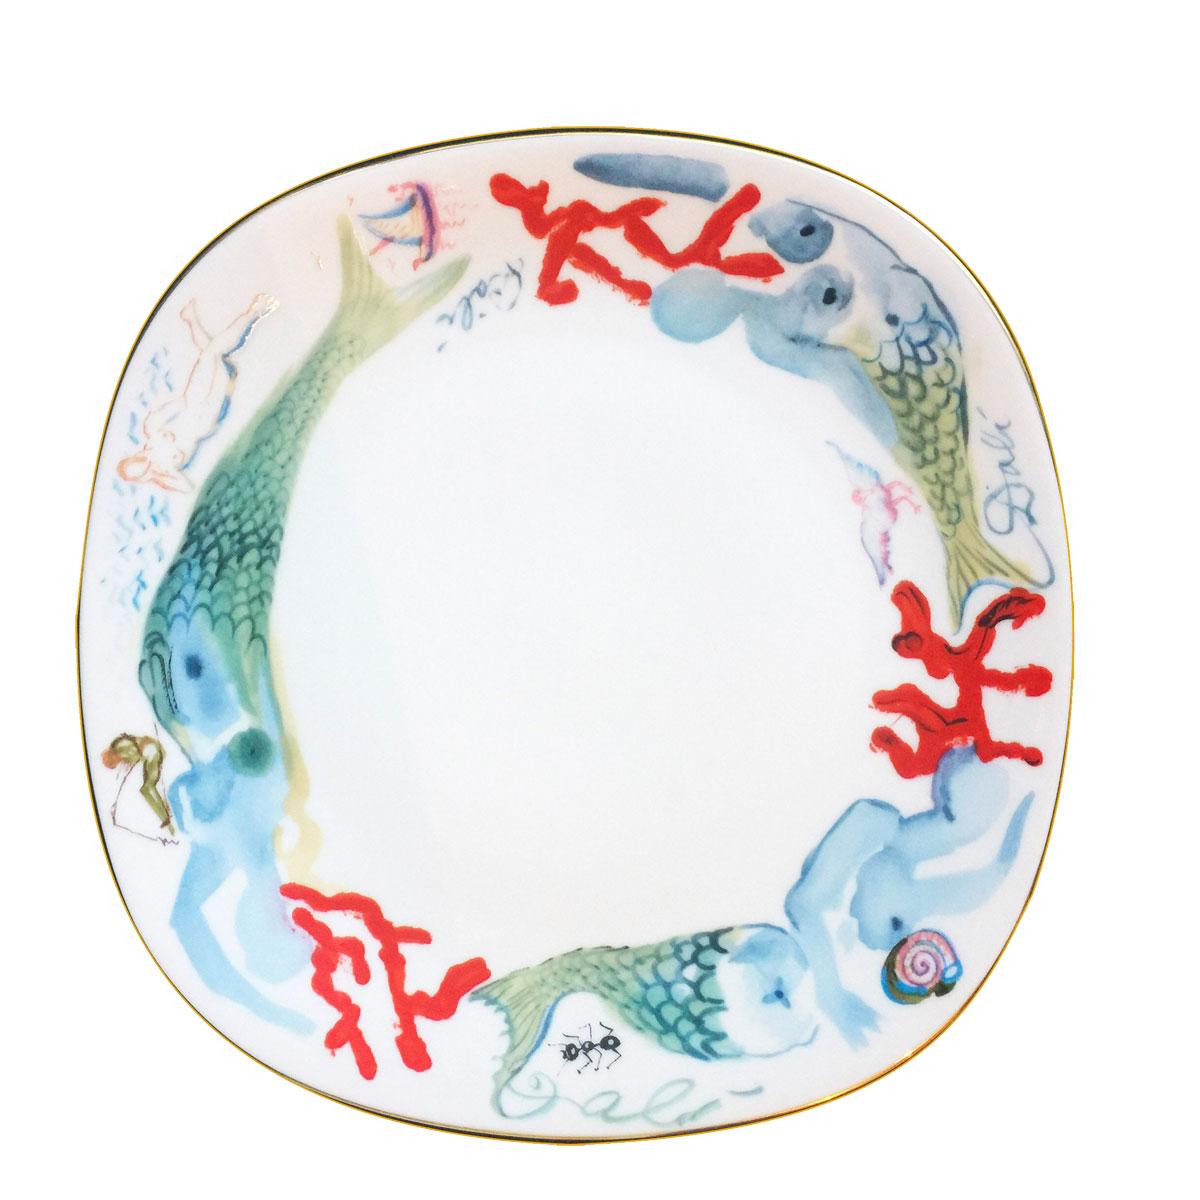 Porcelain set with decoration was created by Salvador Dalí (1904-1989), one of the most famous surrealist painters, and designers. Bavarian high-quality porcelain with gold rim, composed of 108 pièces, this service is for 12 people. Limited edition,